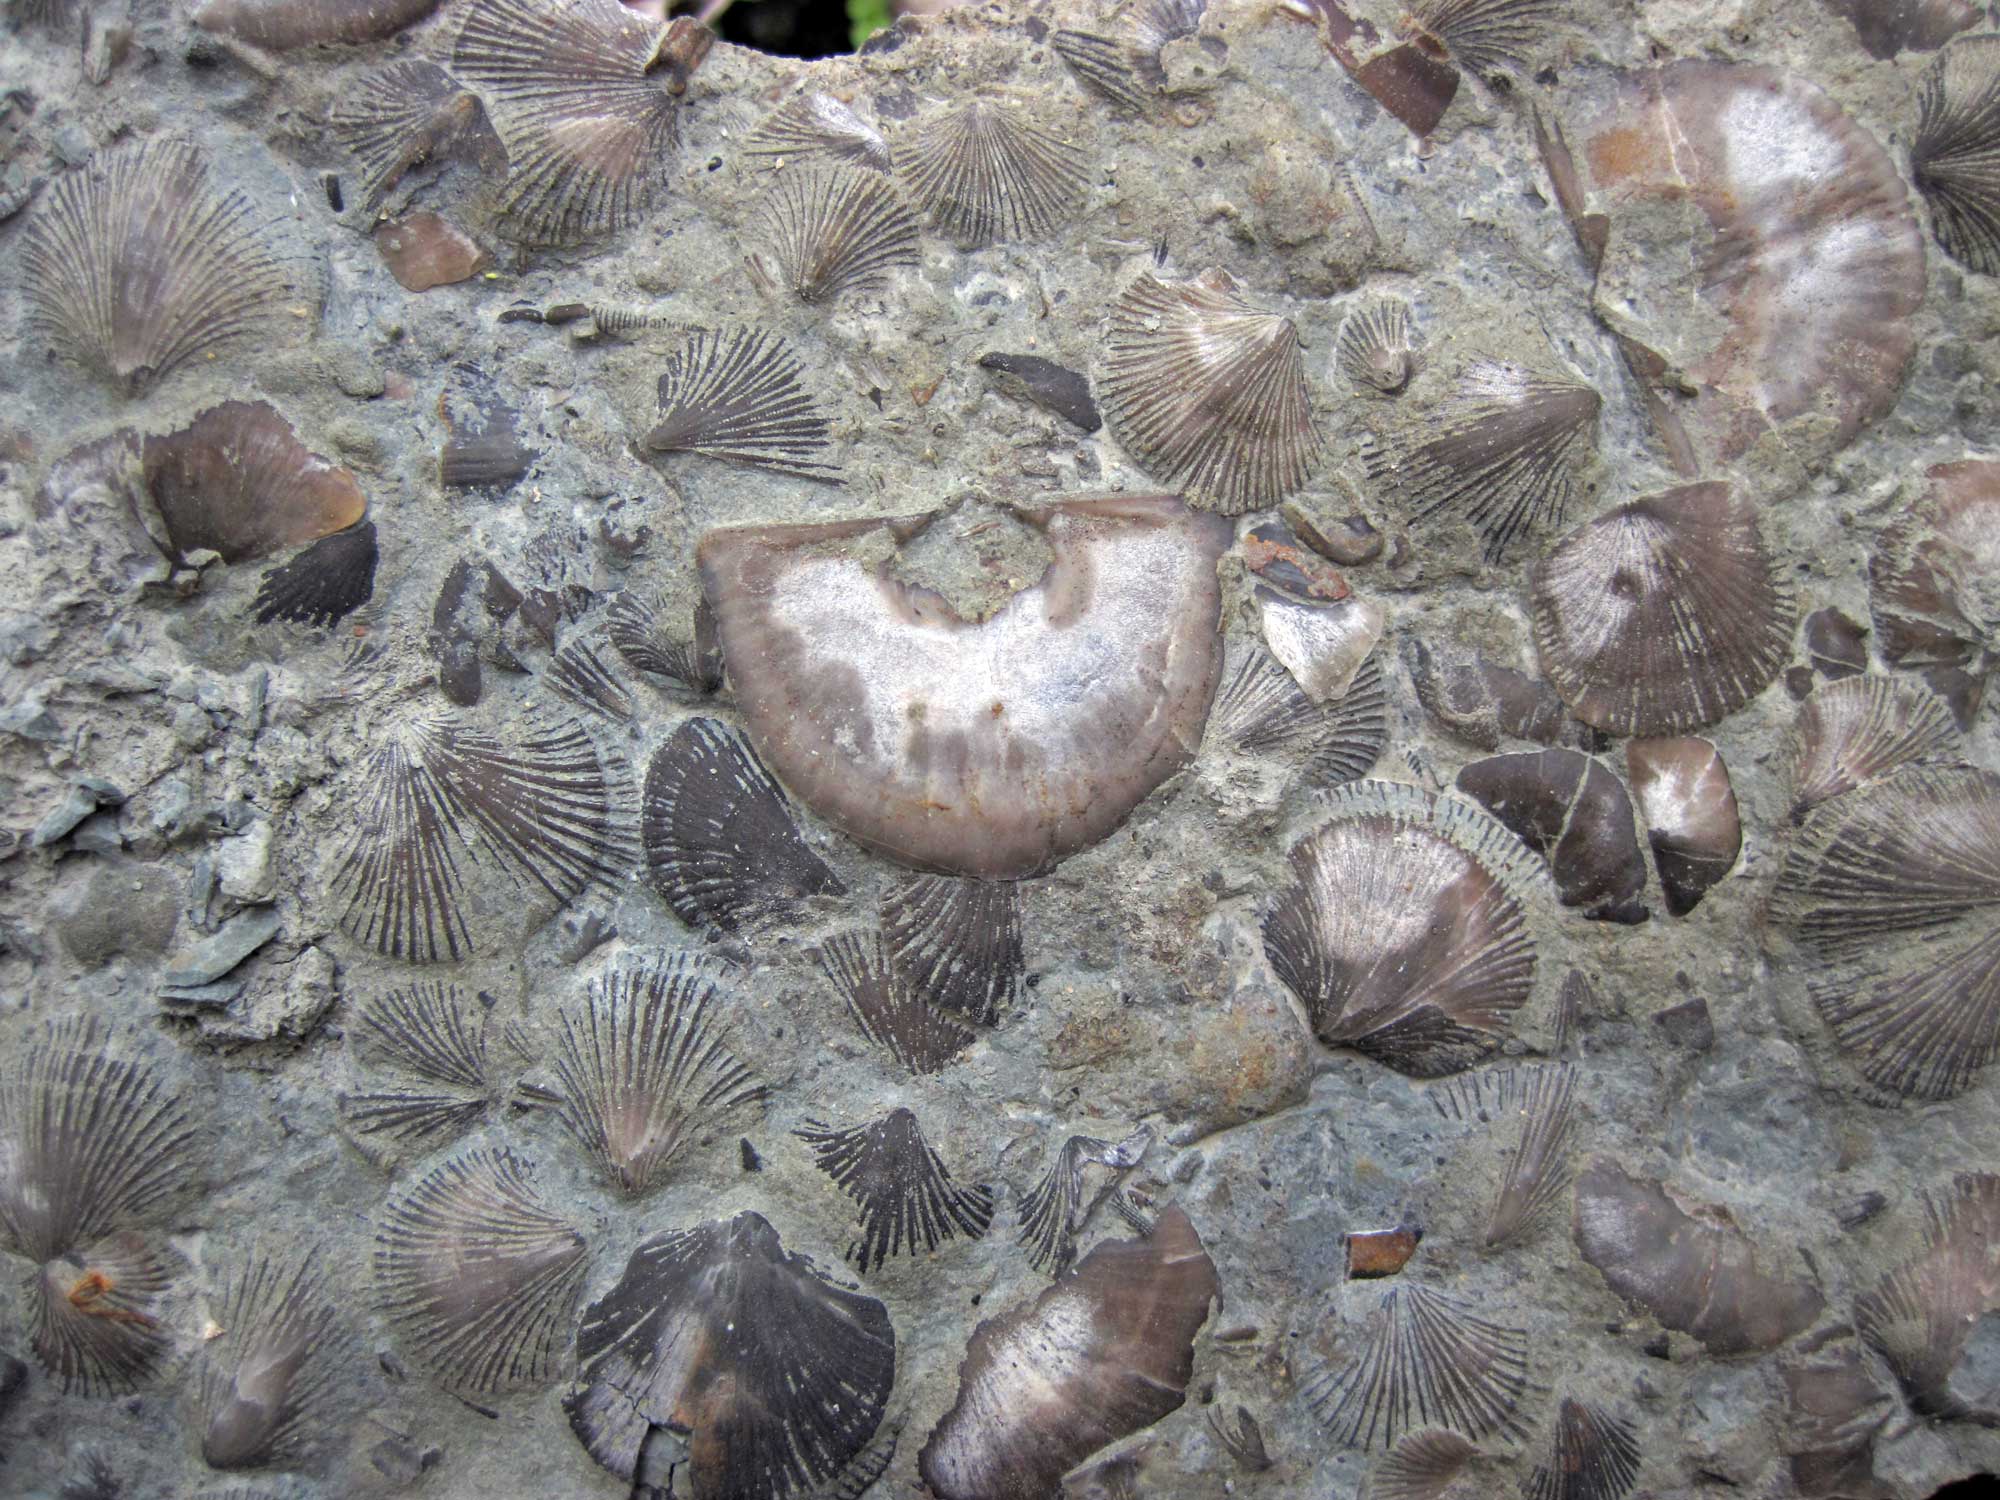 Photograph of brachiopods from the Ordovician of Oho. The photograph shows a dense aggregation of brachiopods preserved on the surface of a gray rock. Some have radiating ridges and some are relatively smooth.